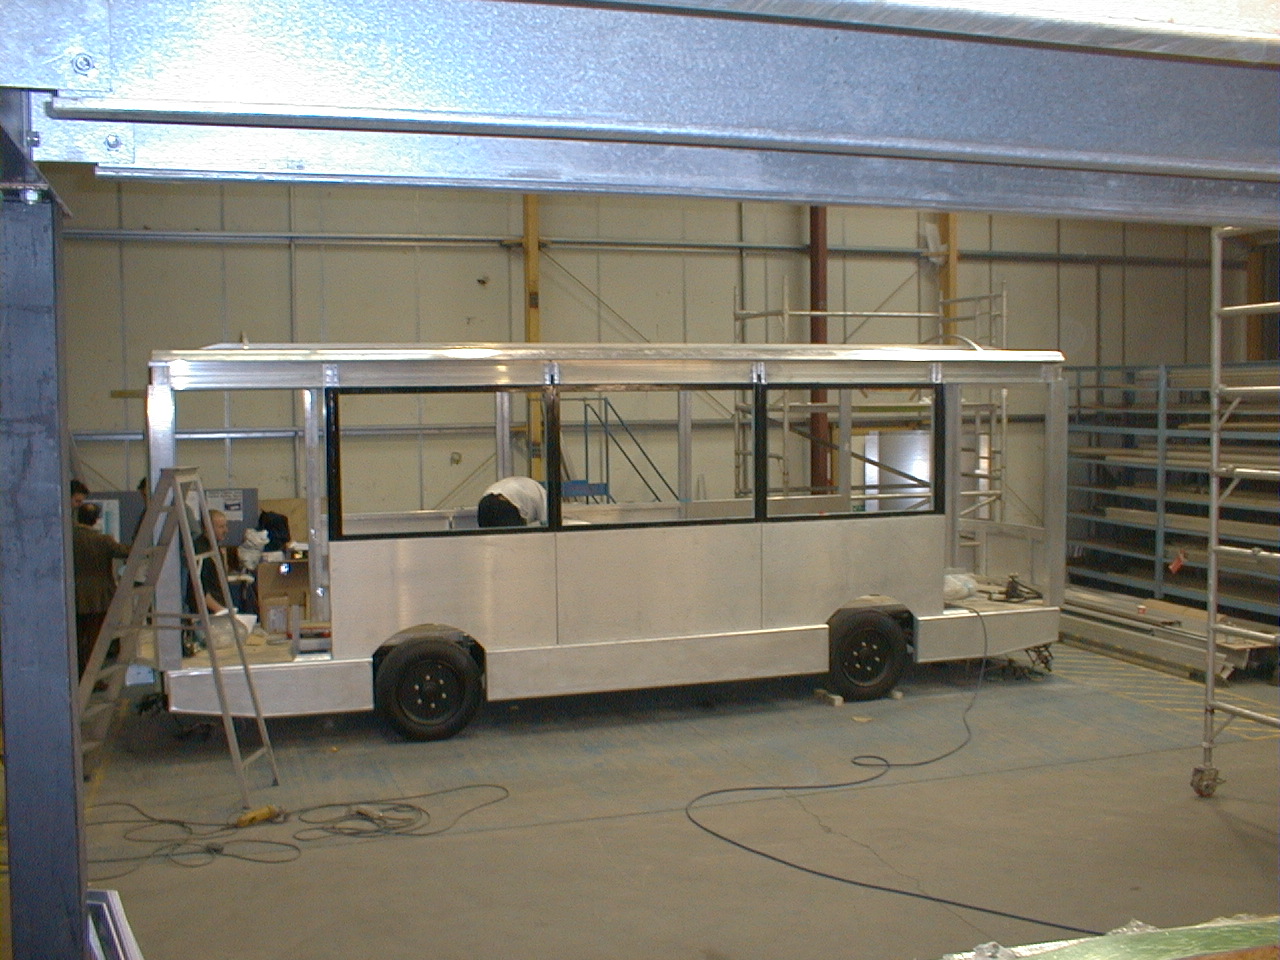 unfinished vehicle at the building facility